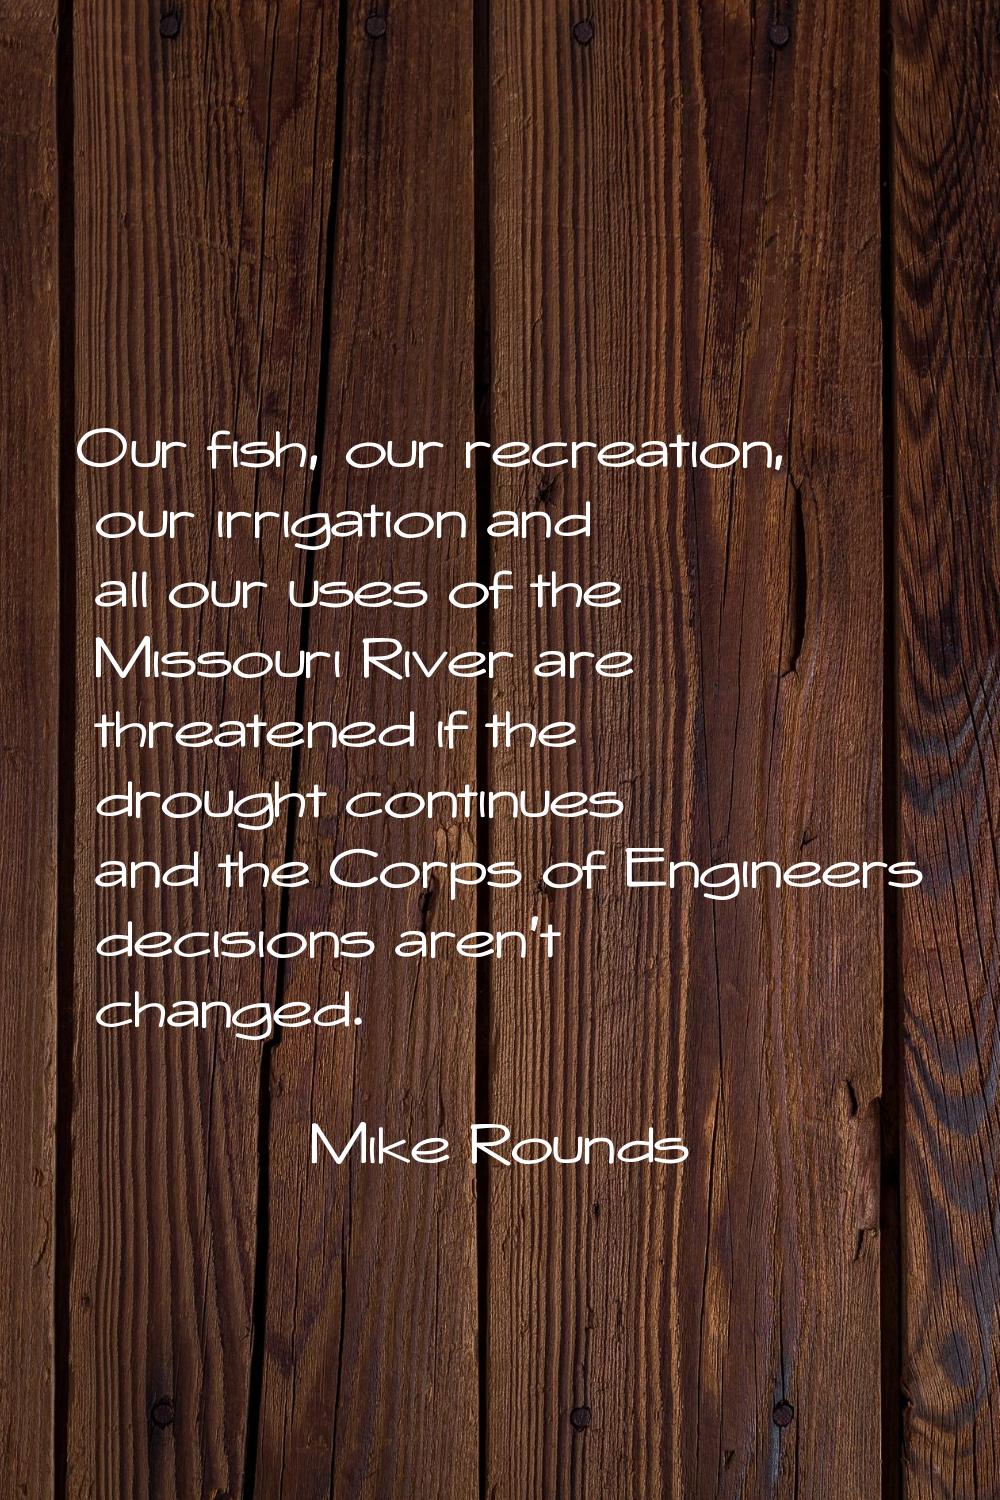 Our fish, our recreation, our irrigation and all our uses of the Missouri River are threatened if t